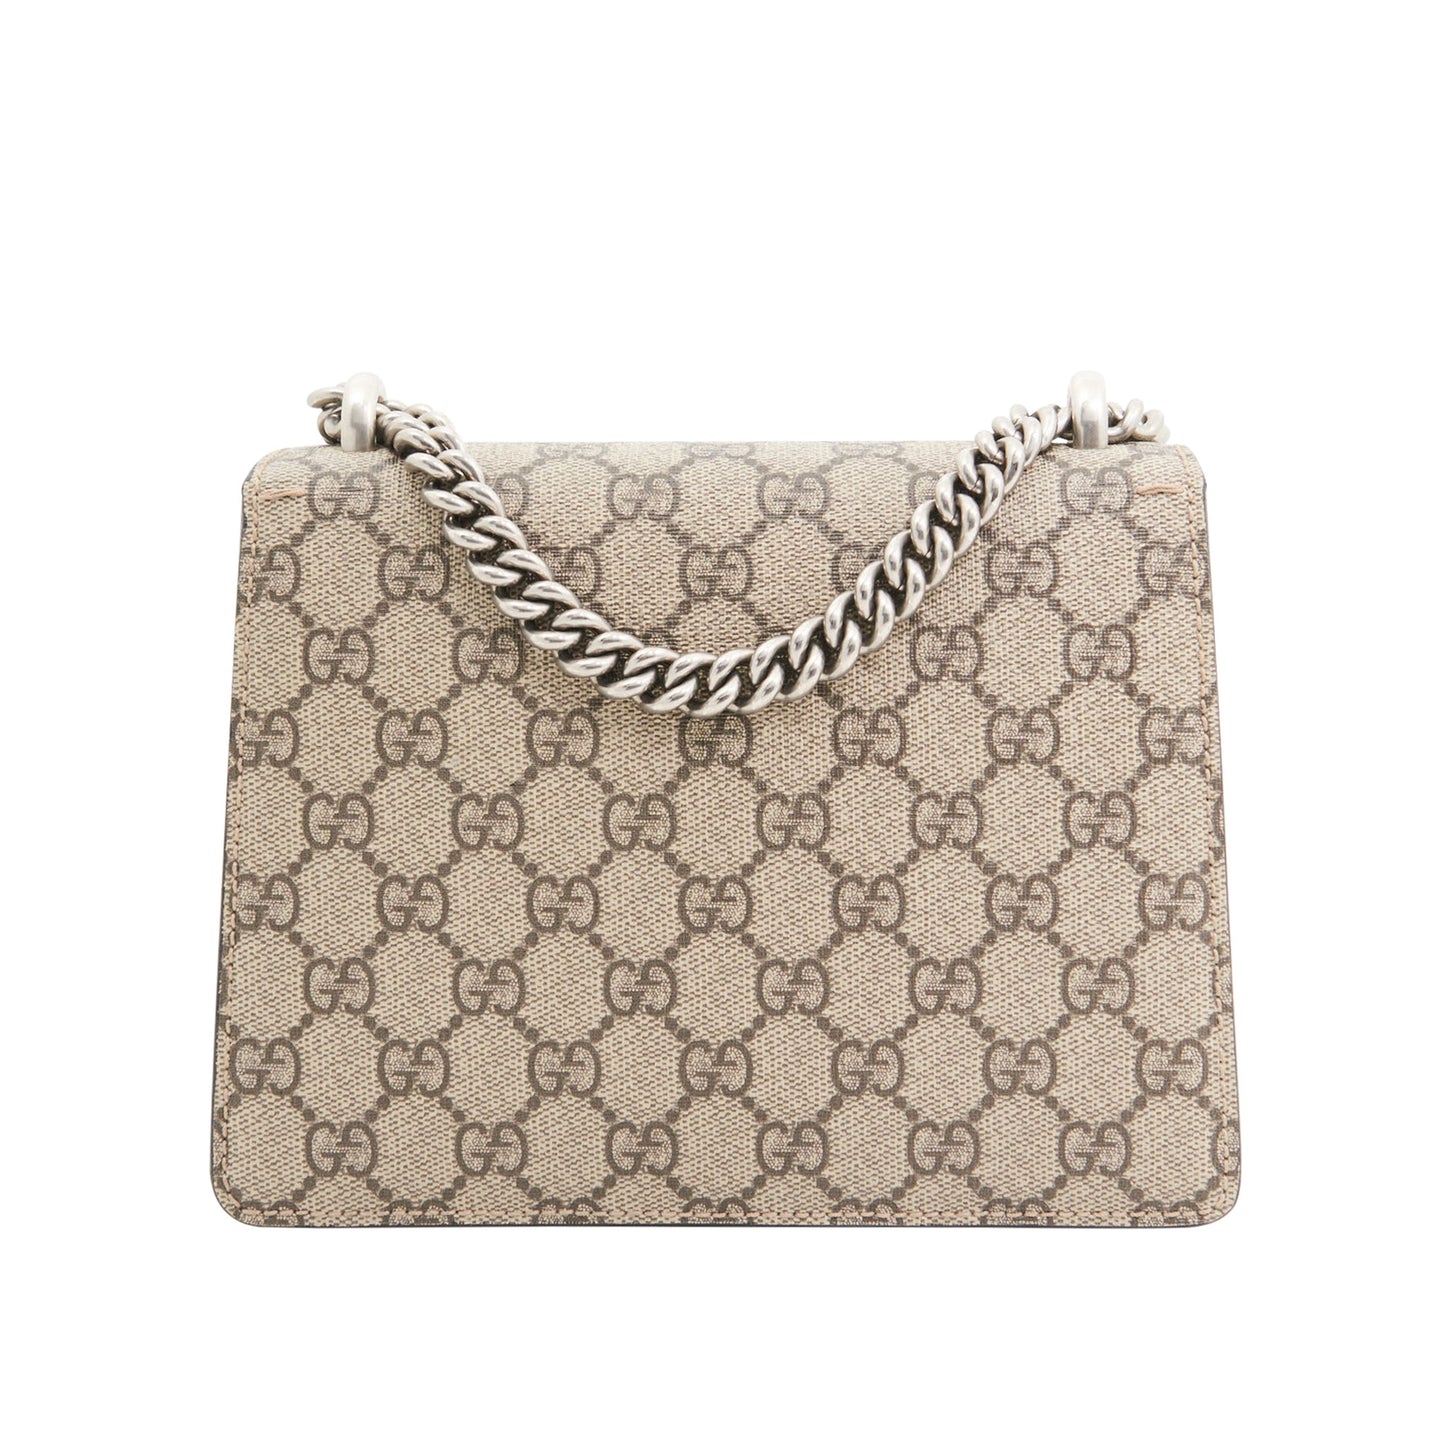 Gucci Canvas Dionysus Small in Brown Monogram SHW